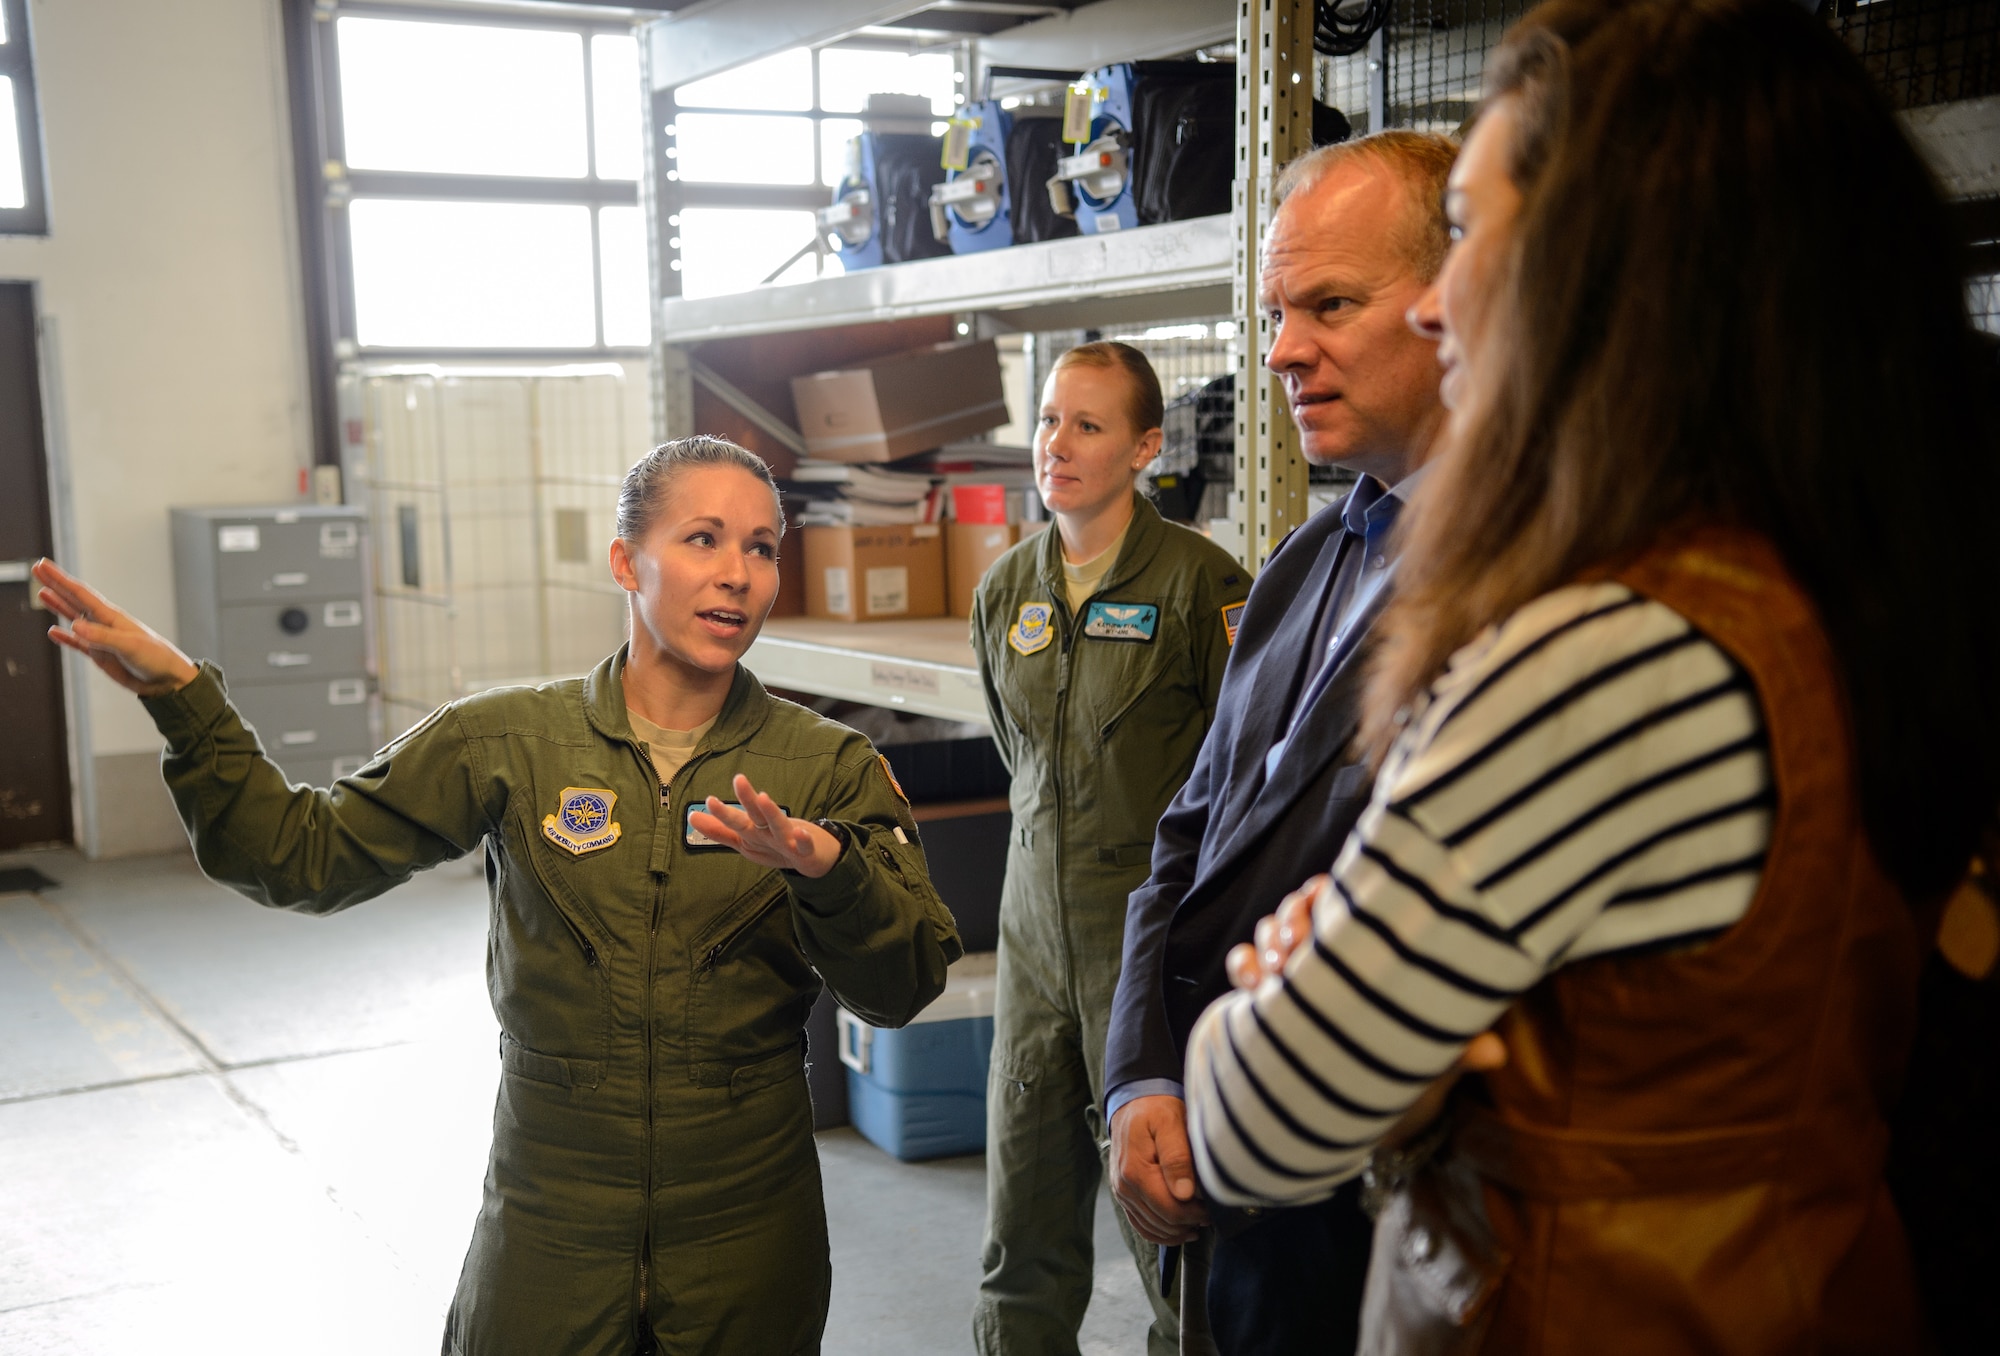 Senior Airman Beverly Spencer, 10th Expeditionary Aeromedical Evacuation Squadron technician, briefs Wyoming Governor Matt Mead and his wife on the equipment used by the 10th EAES Oct. 26, 2015, at Ramstein Air Base, Germany. Mead visited with Wyoming Air National Guardsmen to see how they contribute to the Air Force mission. (U.S. Air Force photo/Staff Sgt. Armando A. Schwier-Morales)